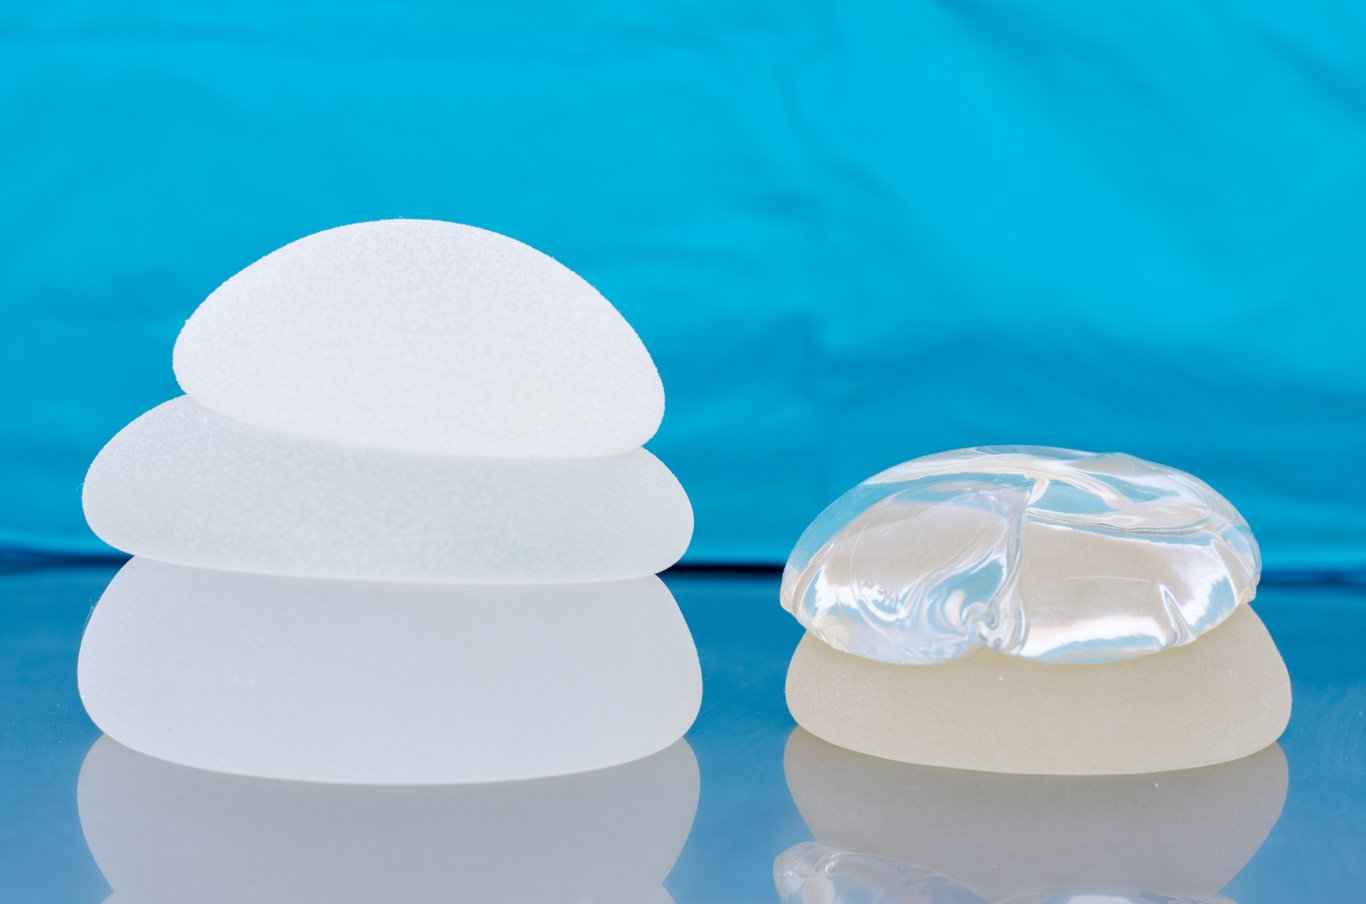 If you are considering breast implant revision in South Carolina, call plastic surgeon Dr. Ted Vaughn at 864-223-0505 to schedule a consultation at our Greenwood office today